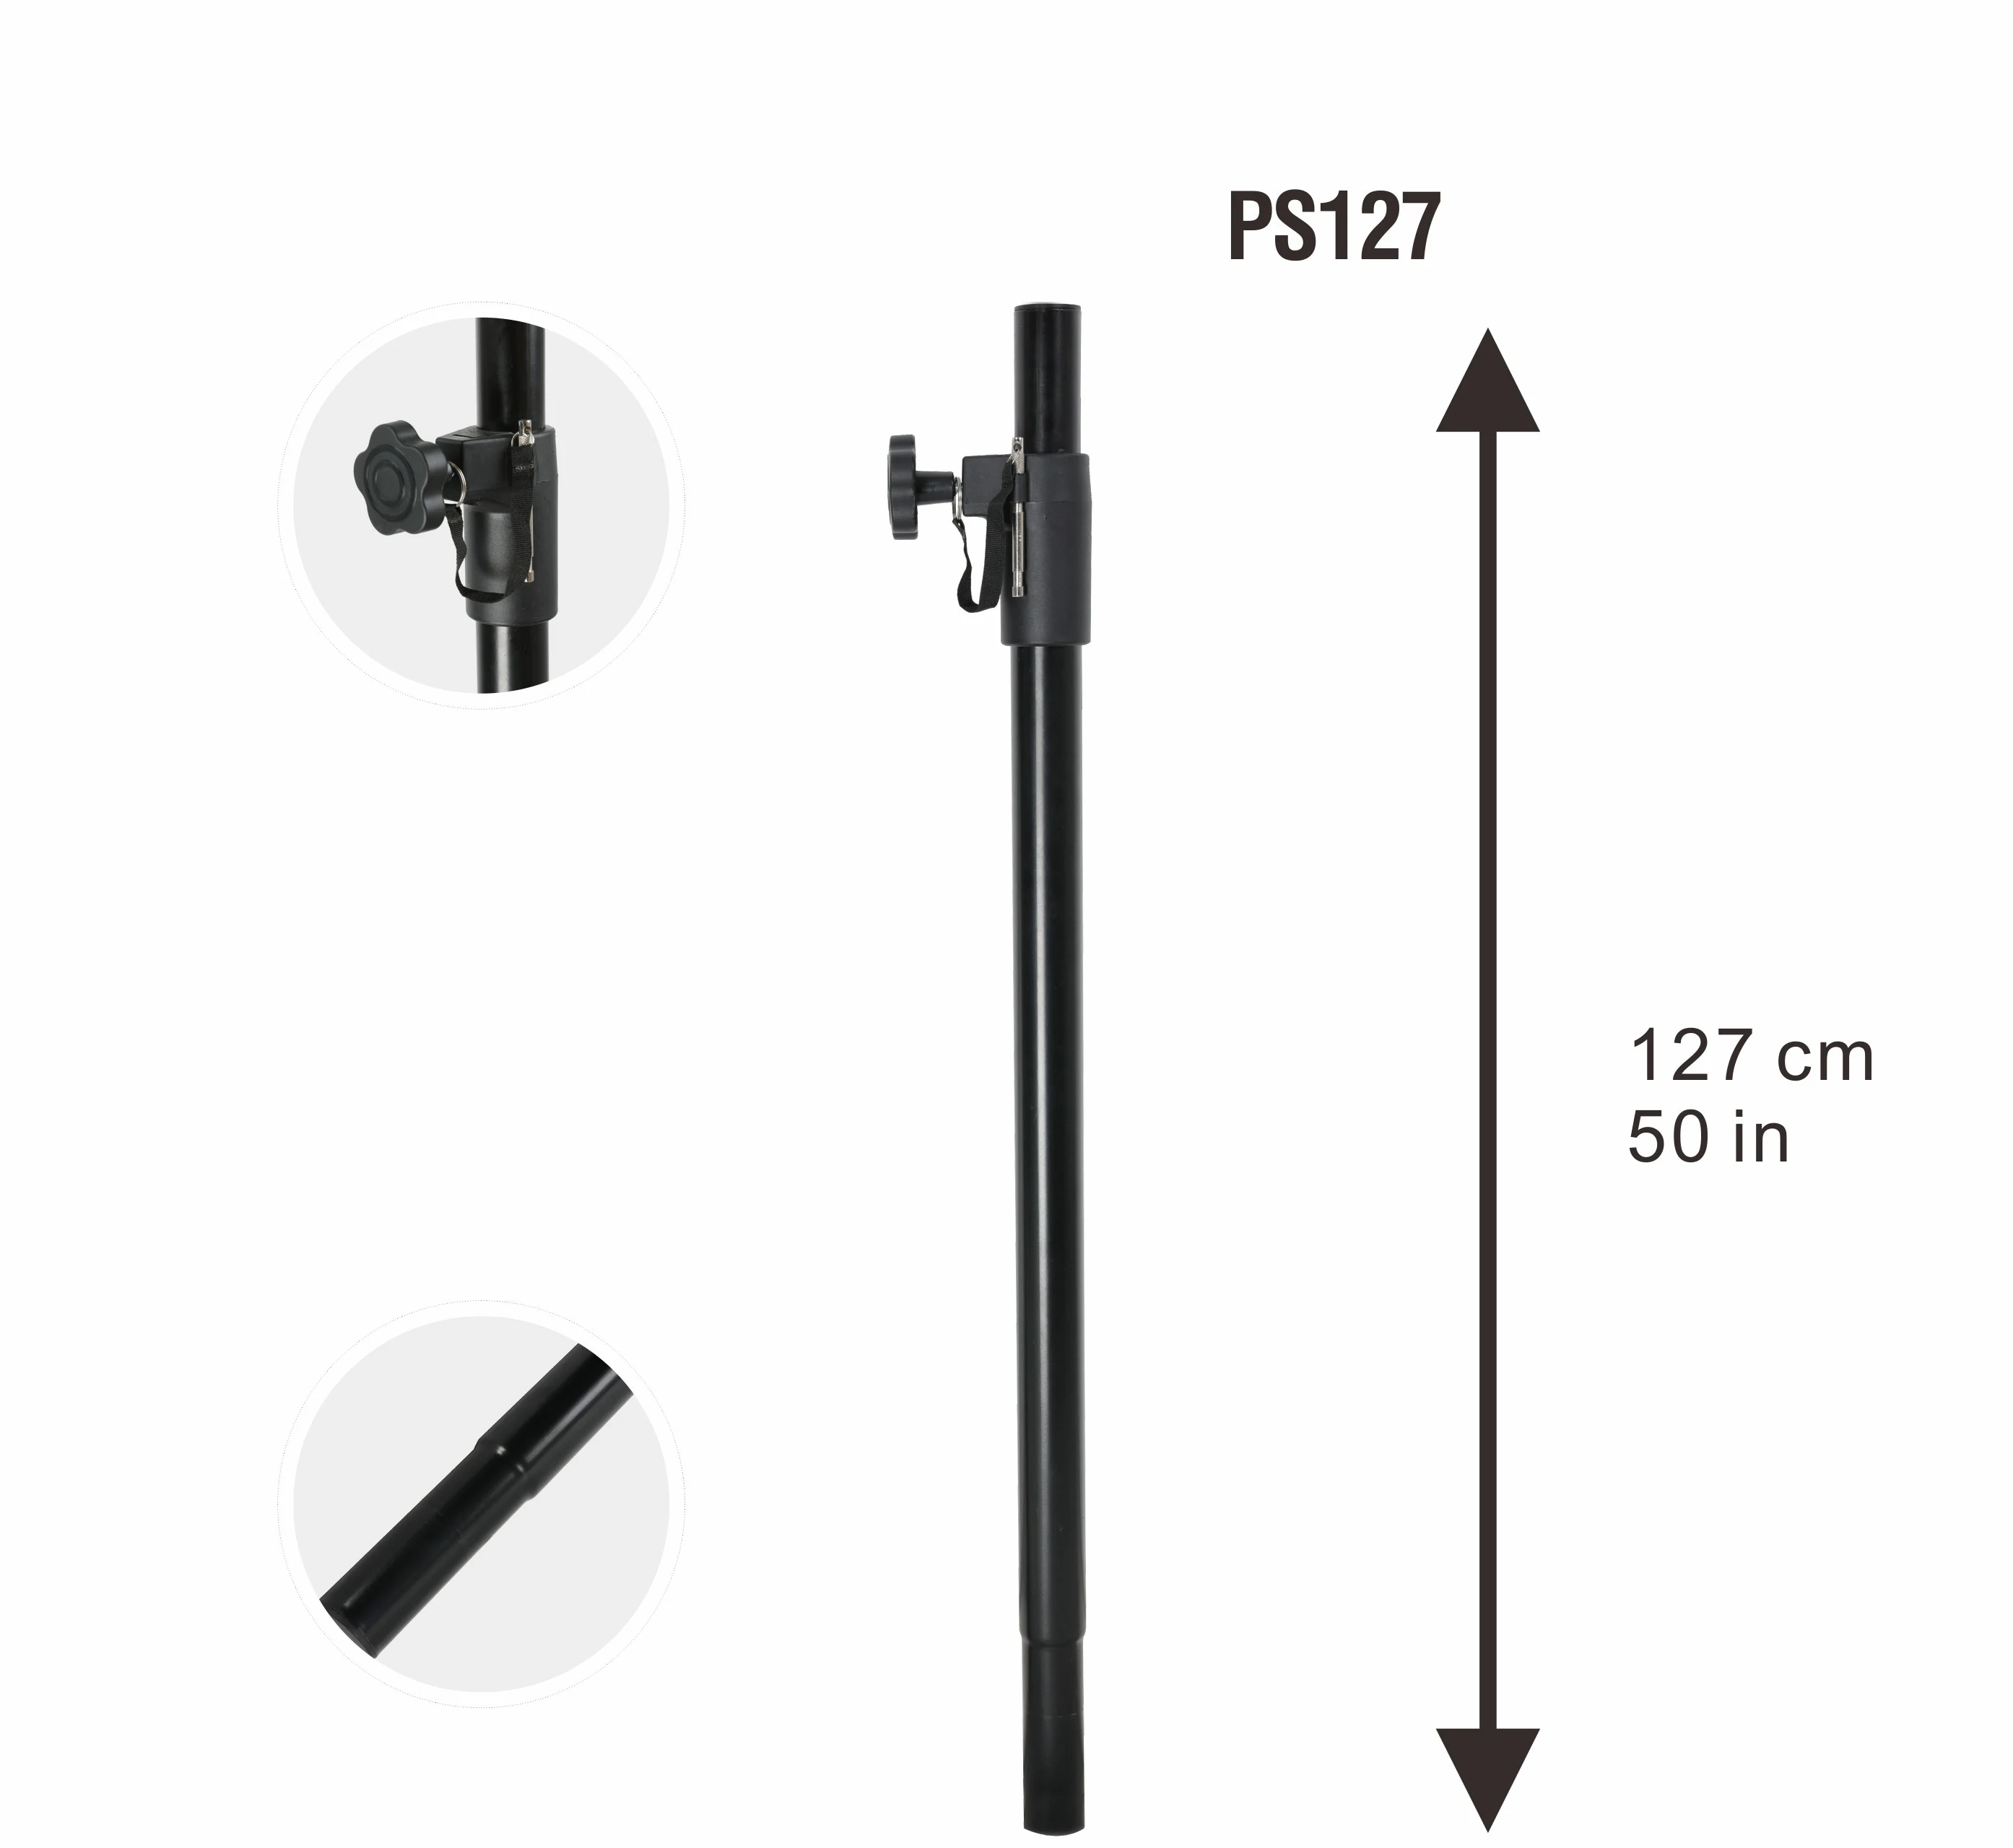 speakers stands, speaker stand tripod, pa speaker stands, Adjustable Stand Pole, Accessories, Speaker Stands, distance pole 127cm spread length ps 127 adjustable stand pole